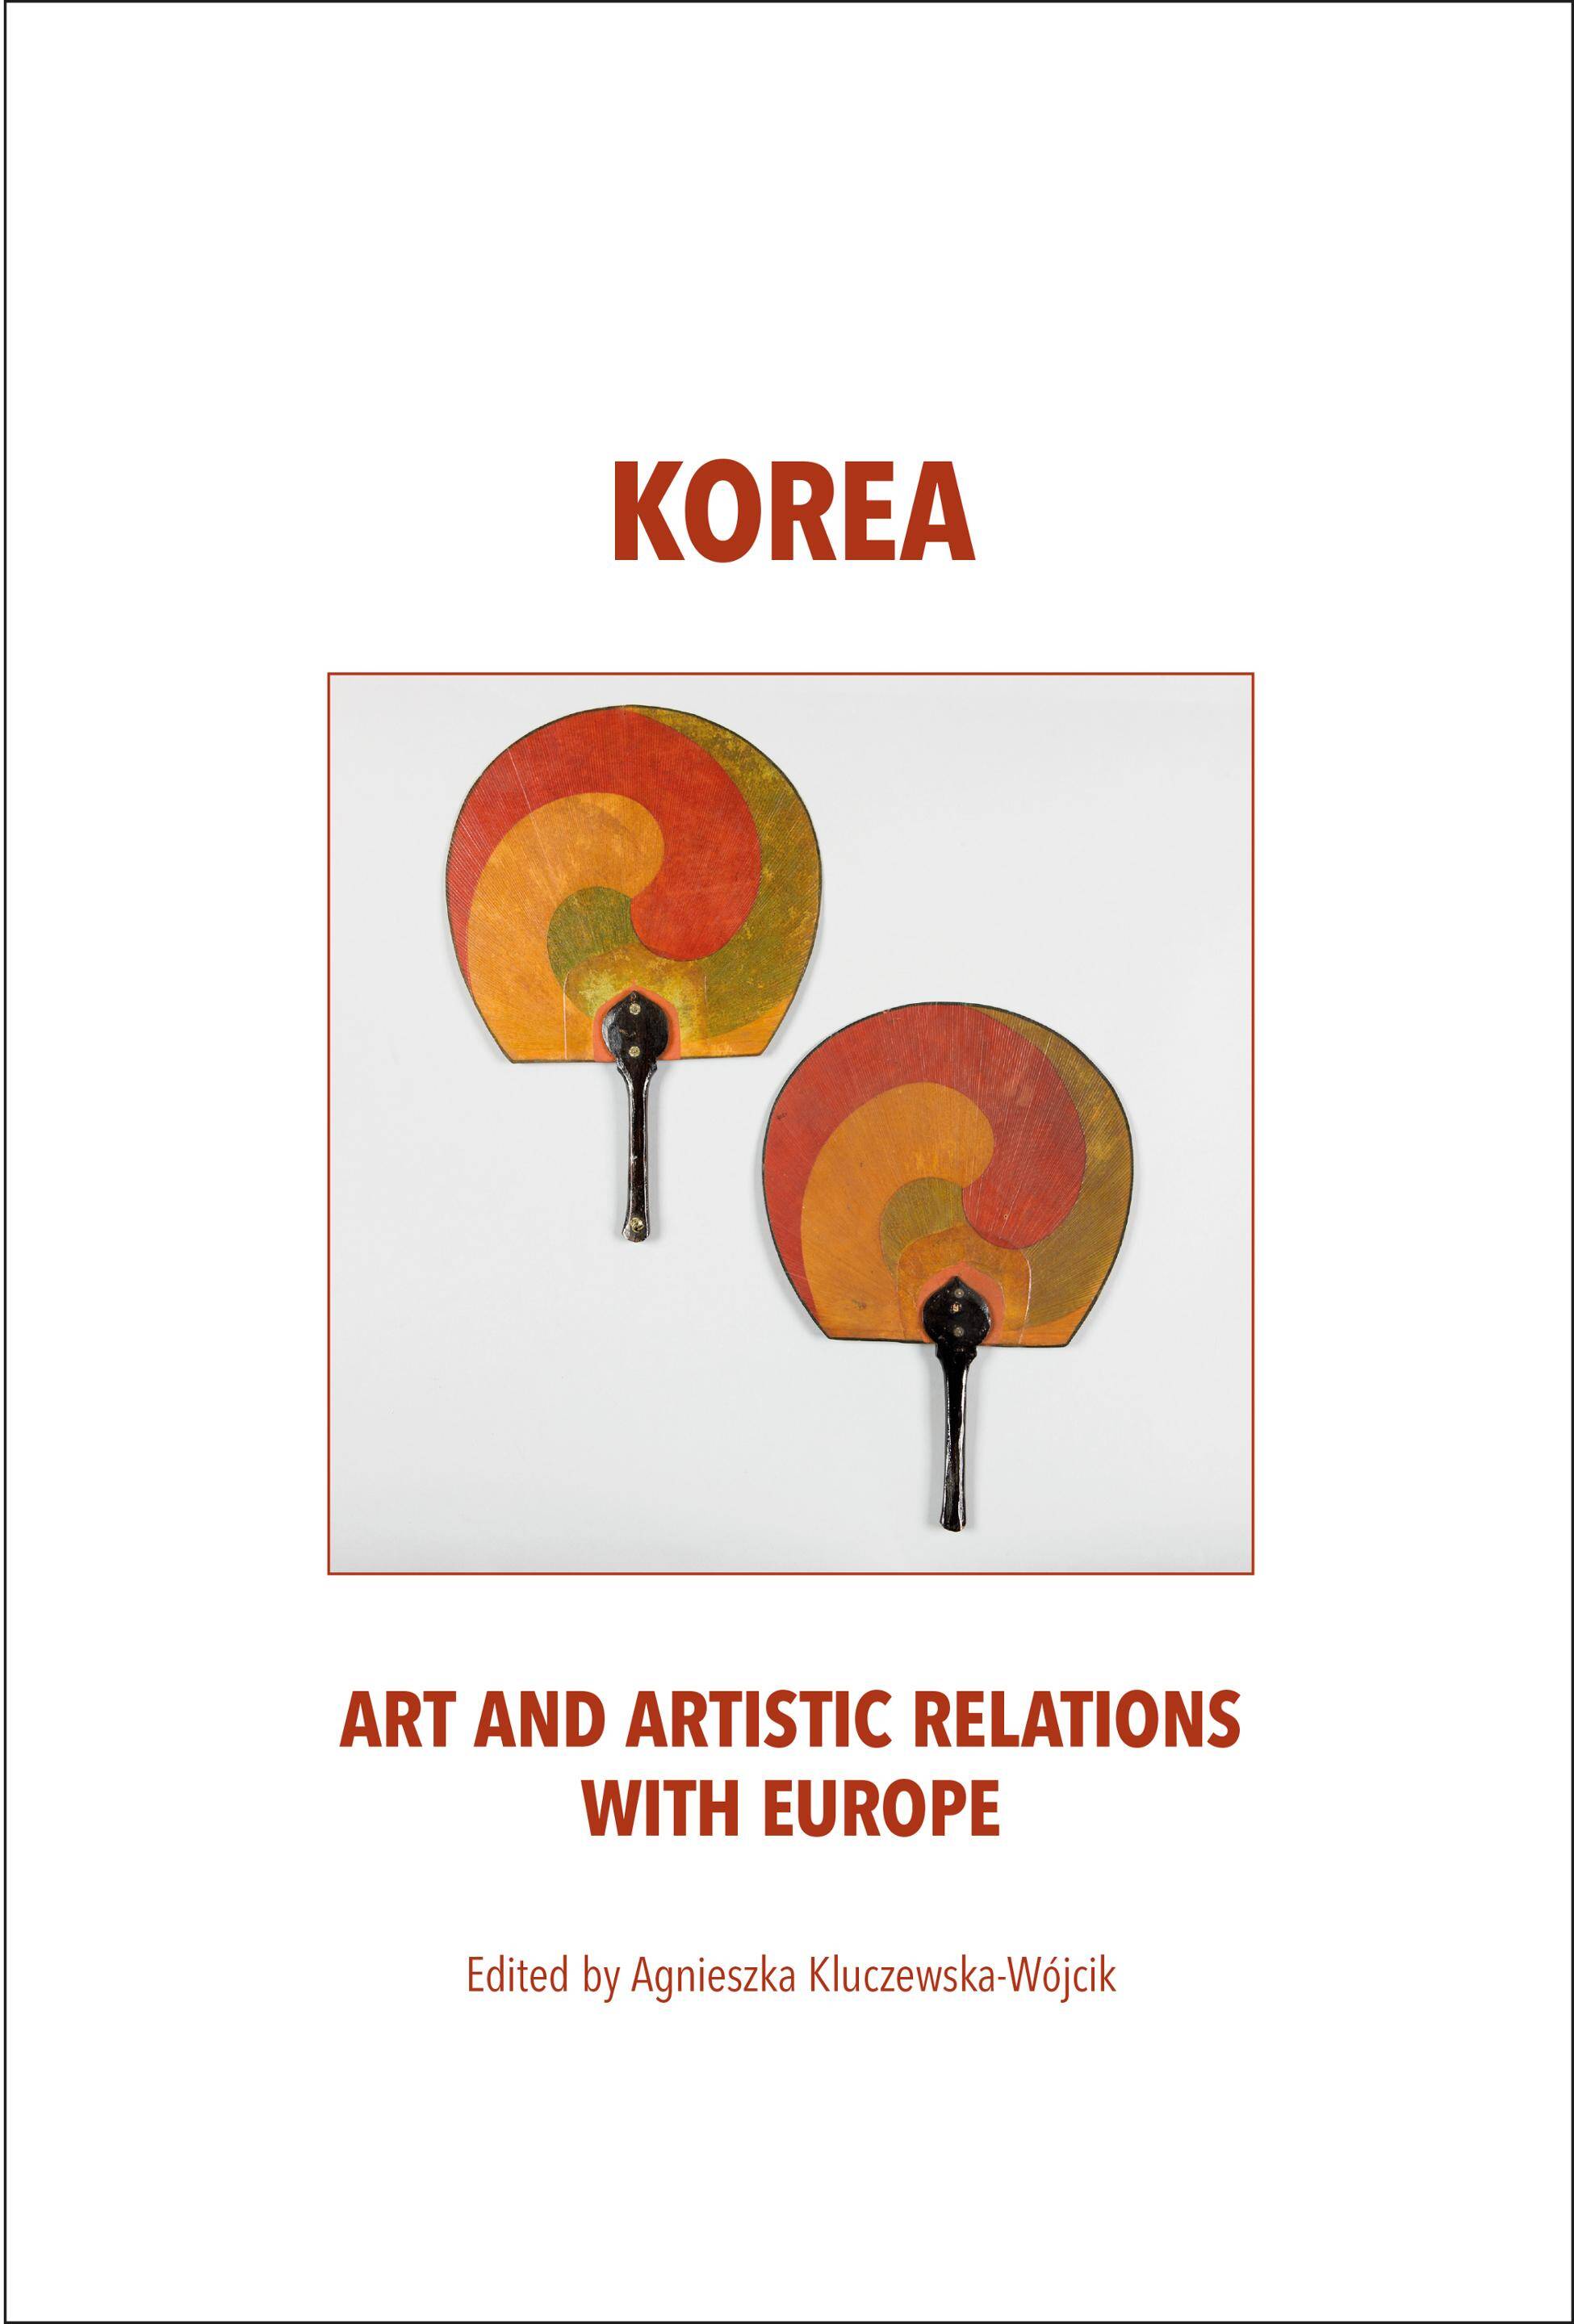 Korea art and artistic relations with europe